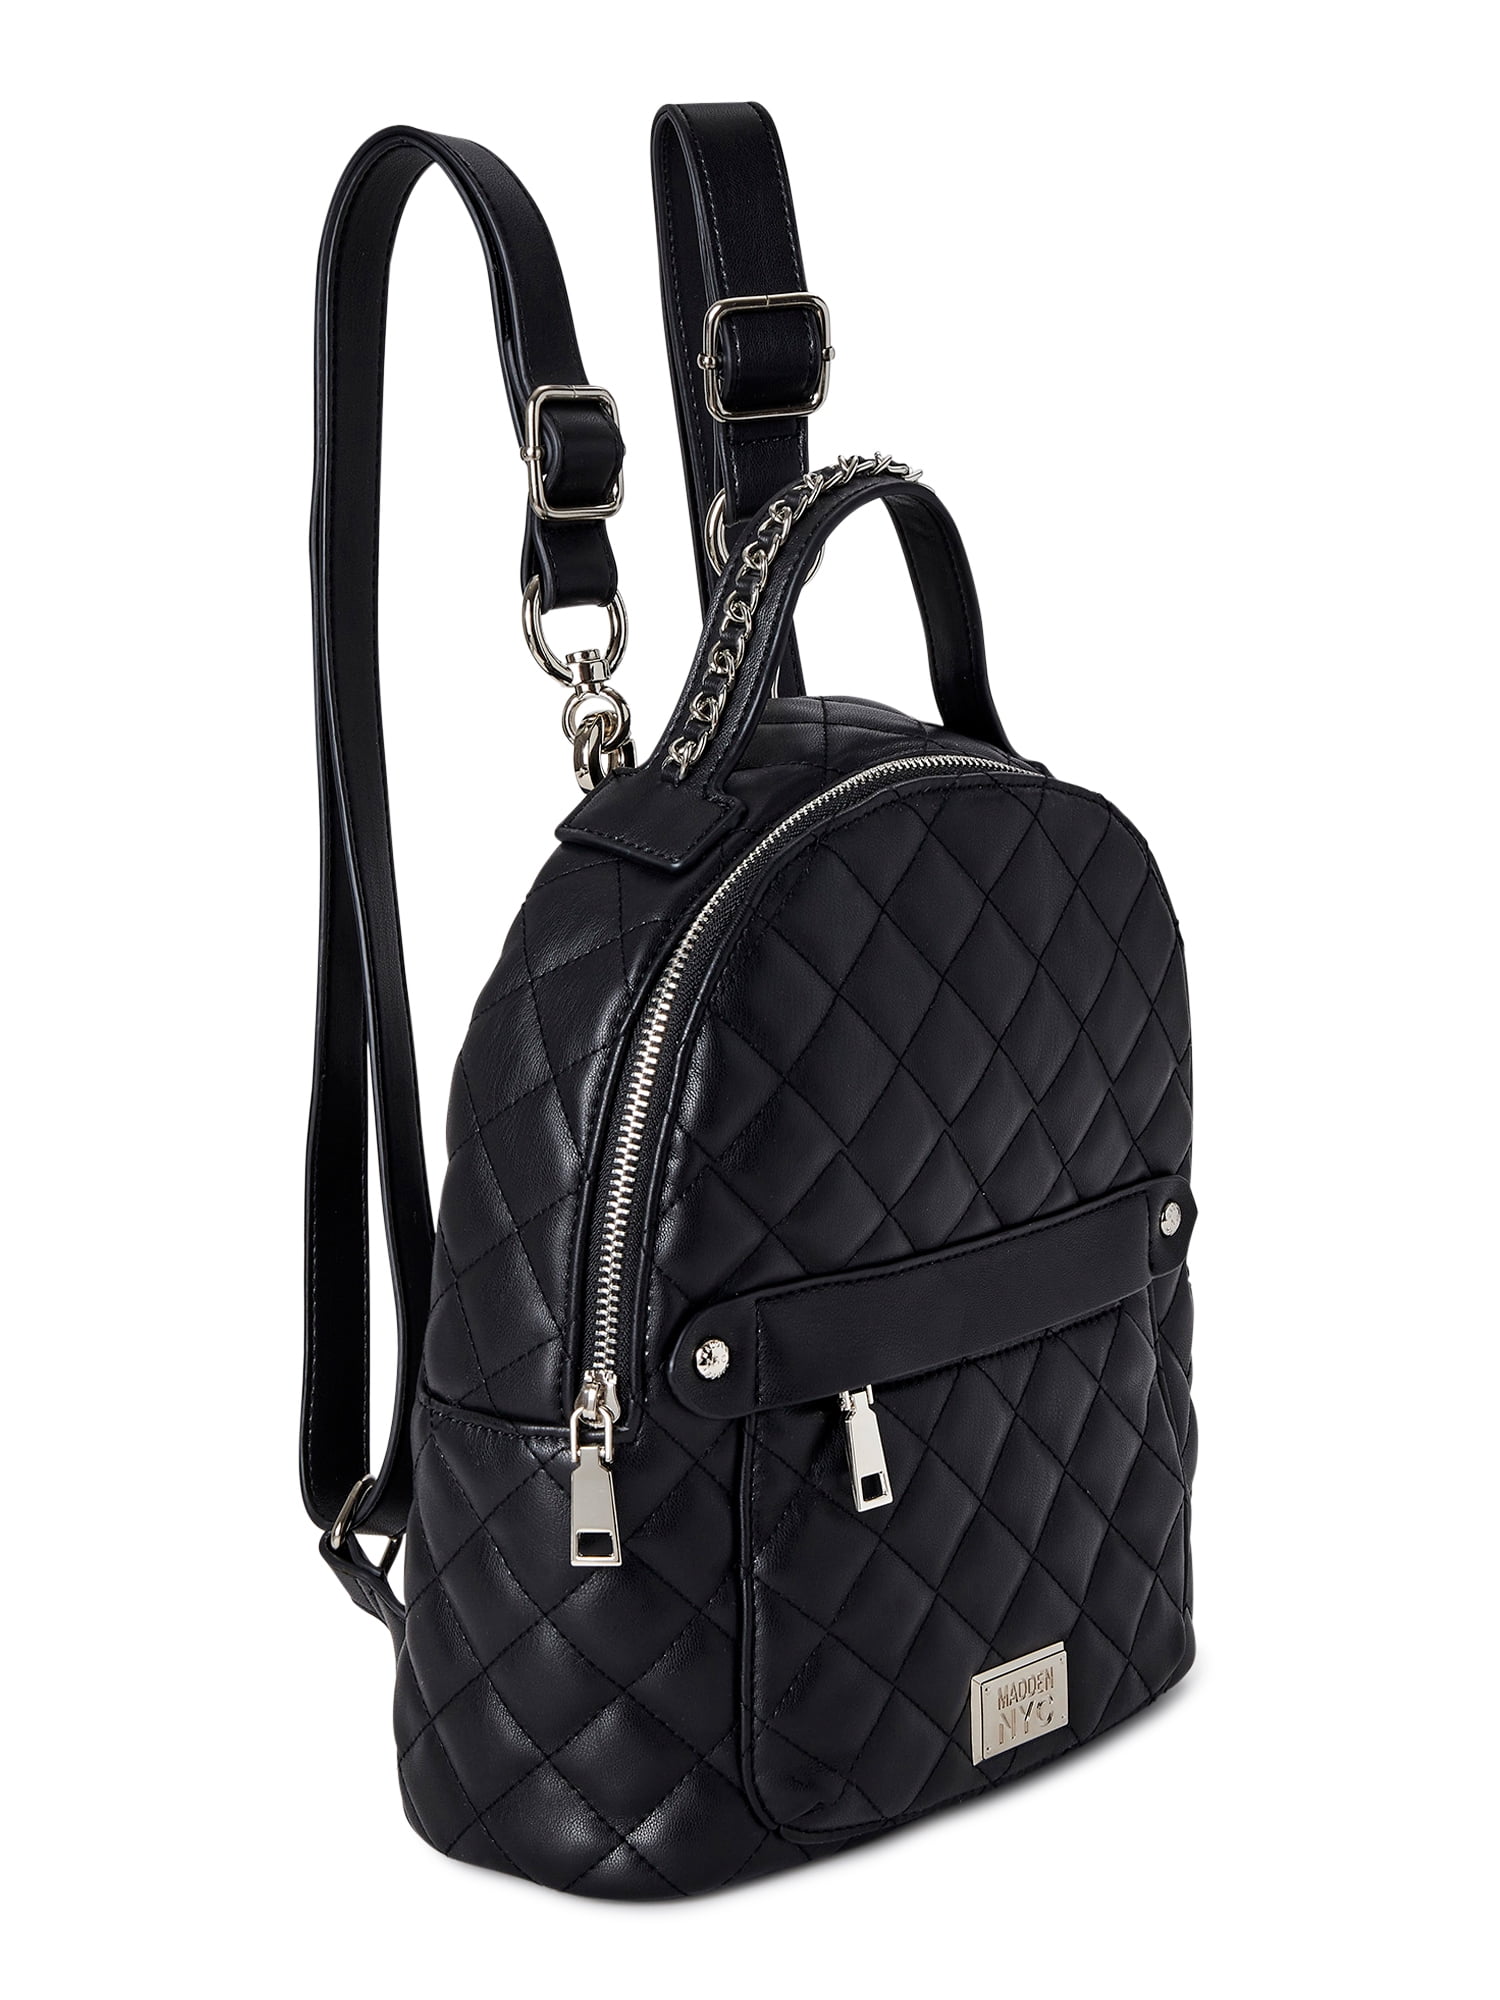 Madden NYC Mini Faux Leather Backpack NWT